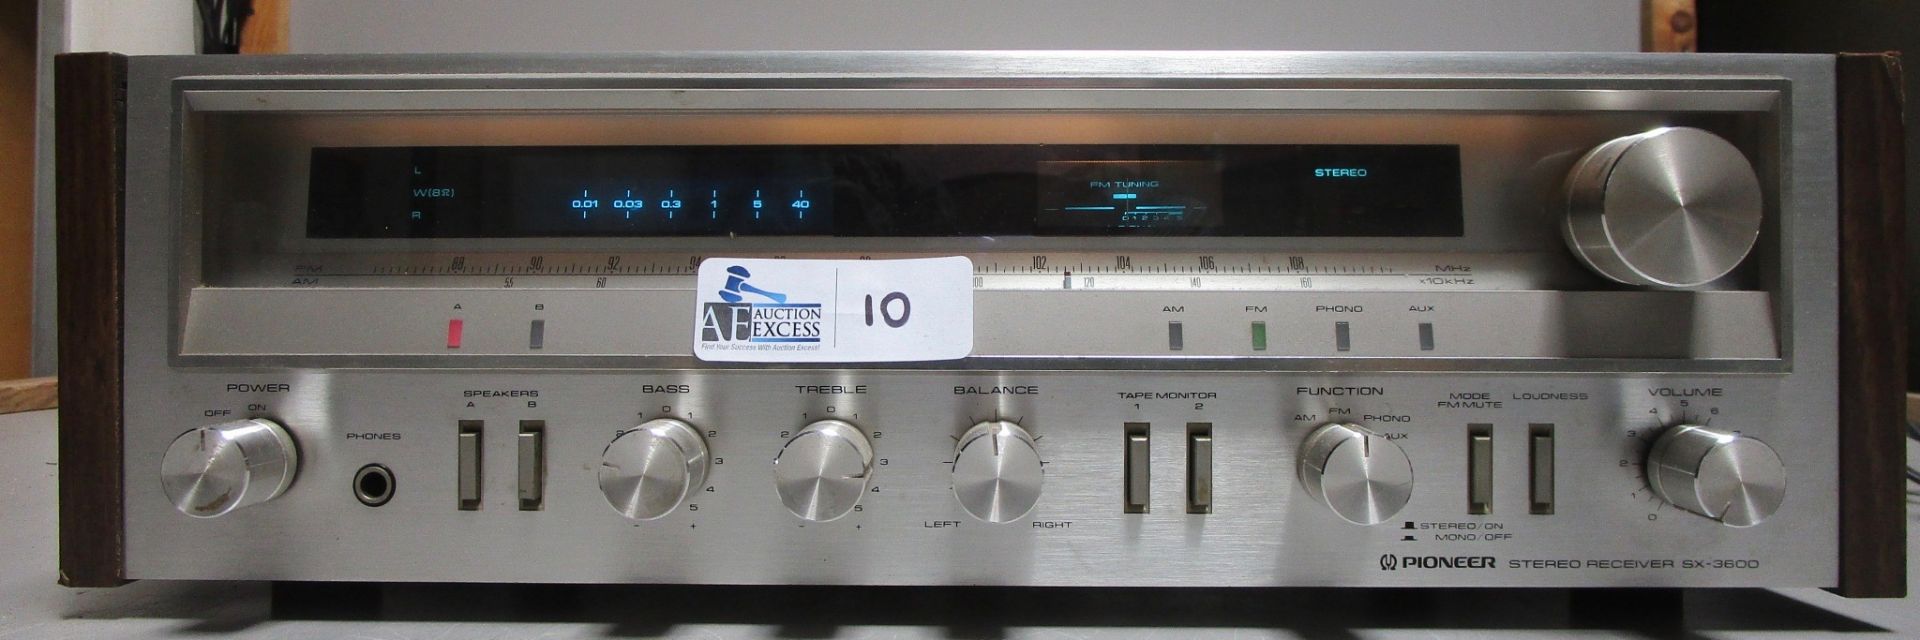 PIONEER STEREO RECEIVER SX-3600